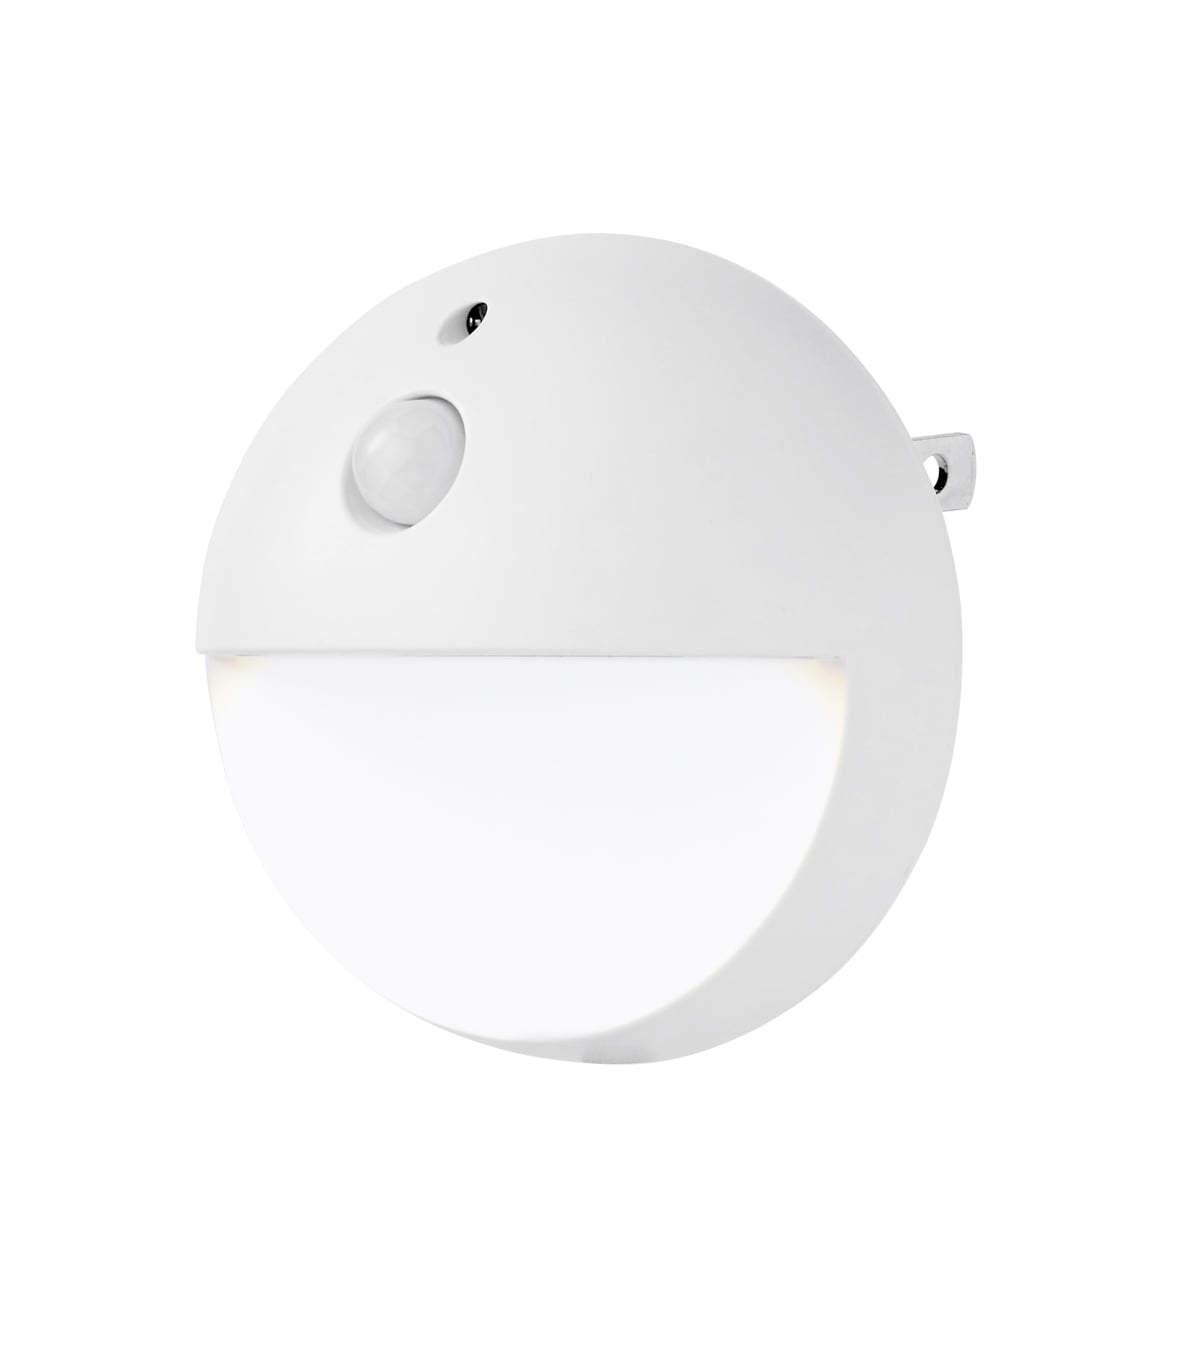 Feit Electric 2.6 in. Battery Operated LED White Motion Sensor 8